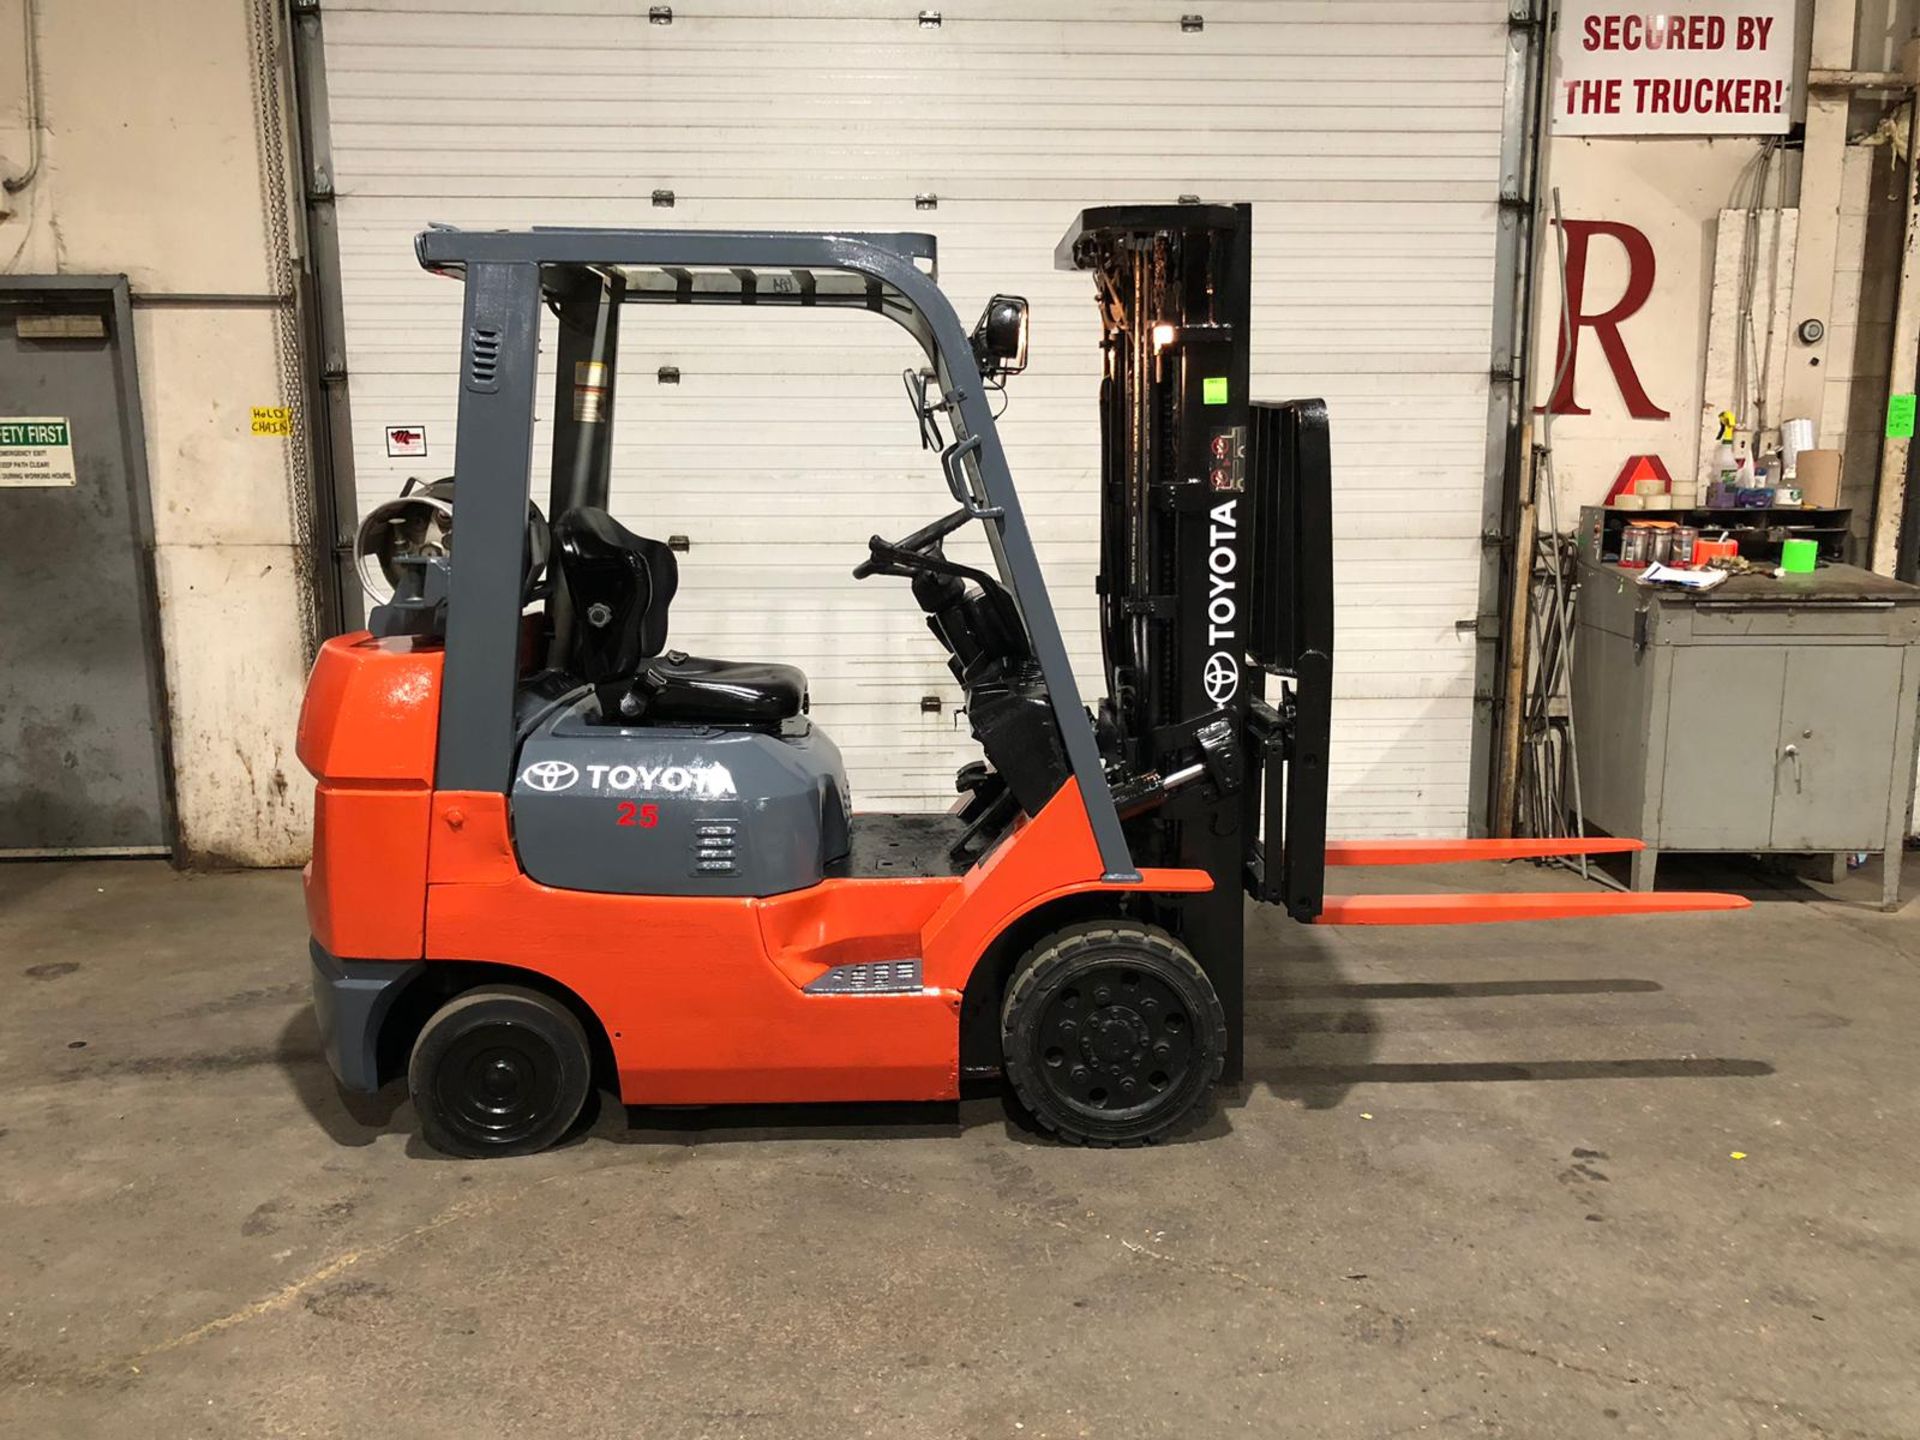 Toyota 5,000lbs Capacity LPG (Propane) Forklift with sideshift and 3-STAGE MAST